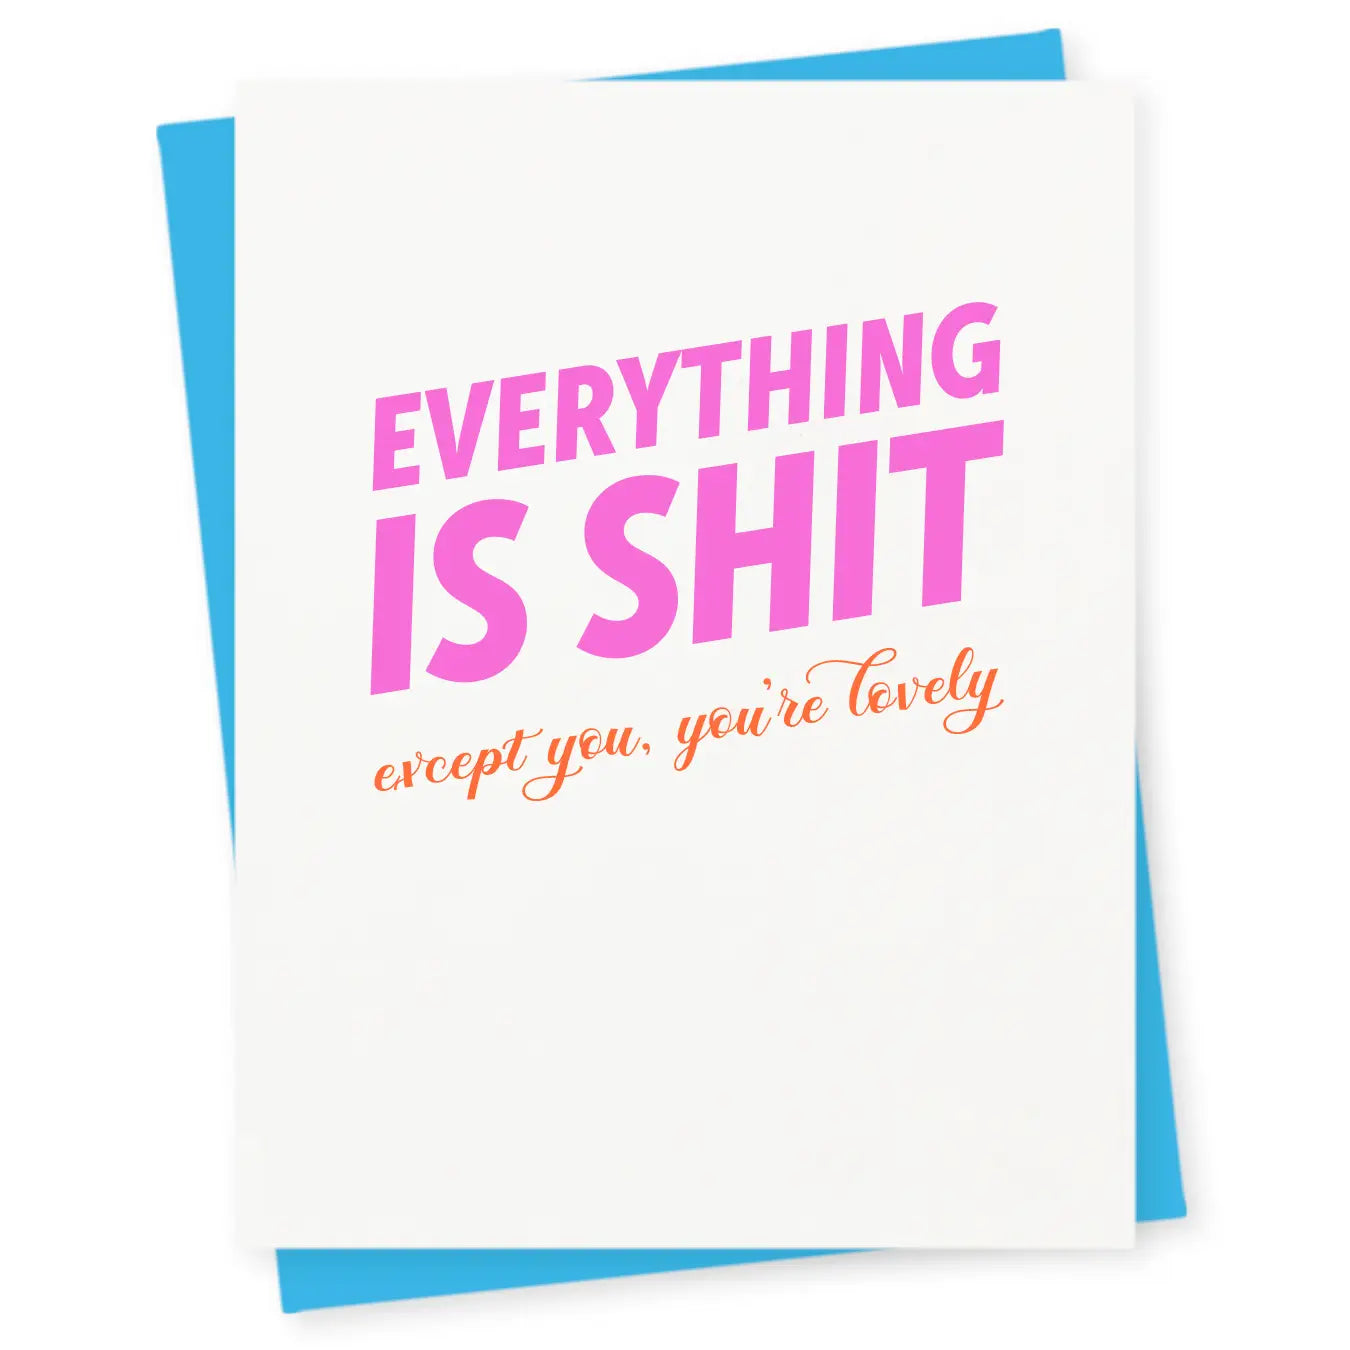 Everything Is Shit Except You, You're Lovely Card